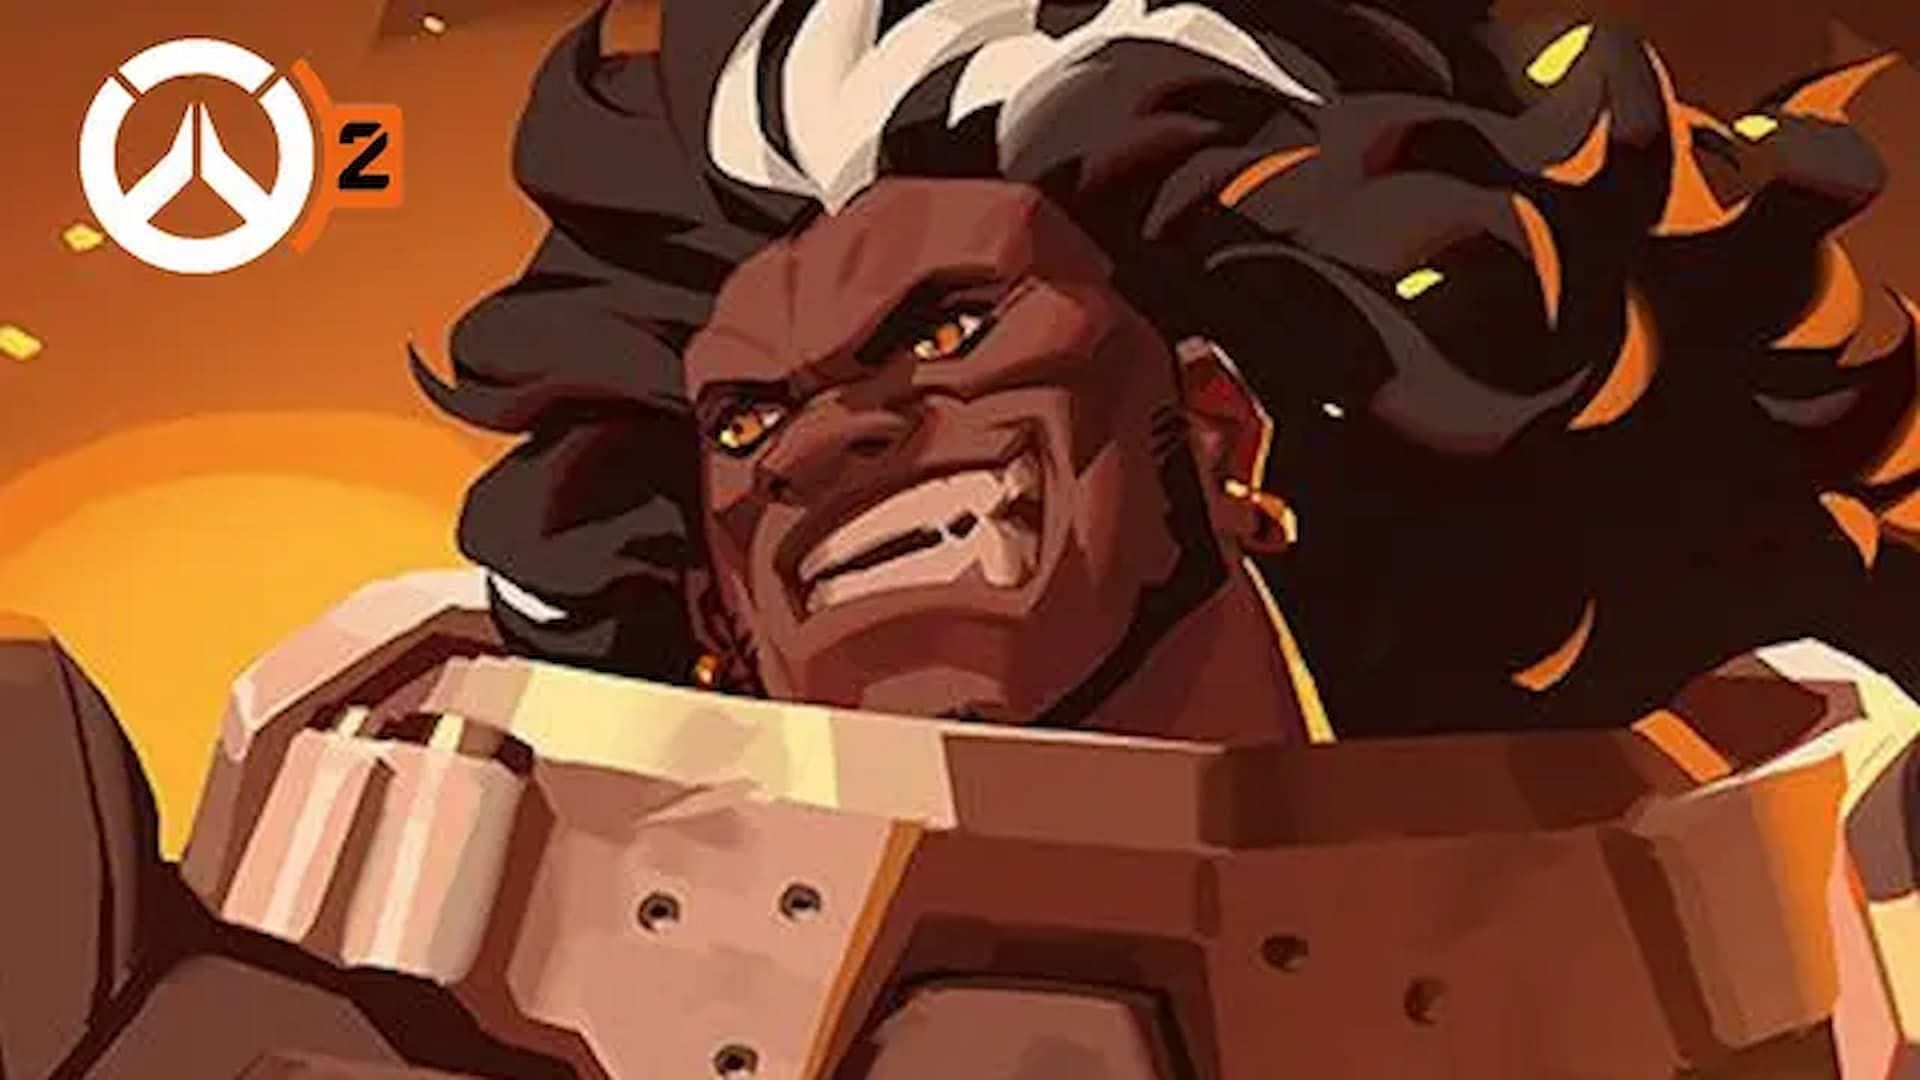 Mauga could be the new tank hero in Overwatch 2 (Image via Blizzard)